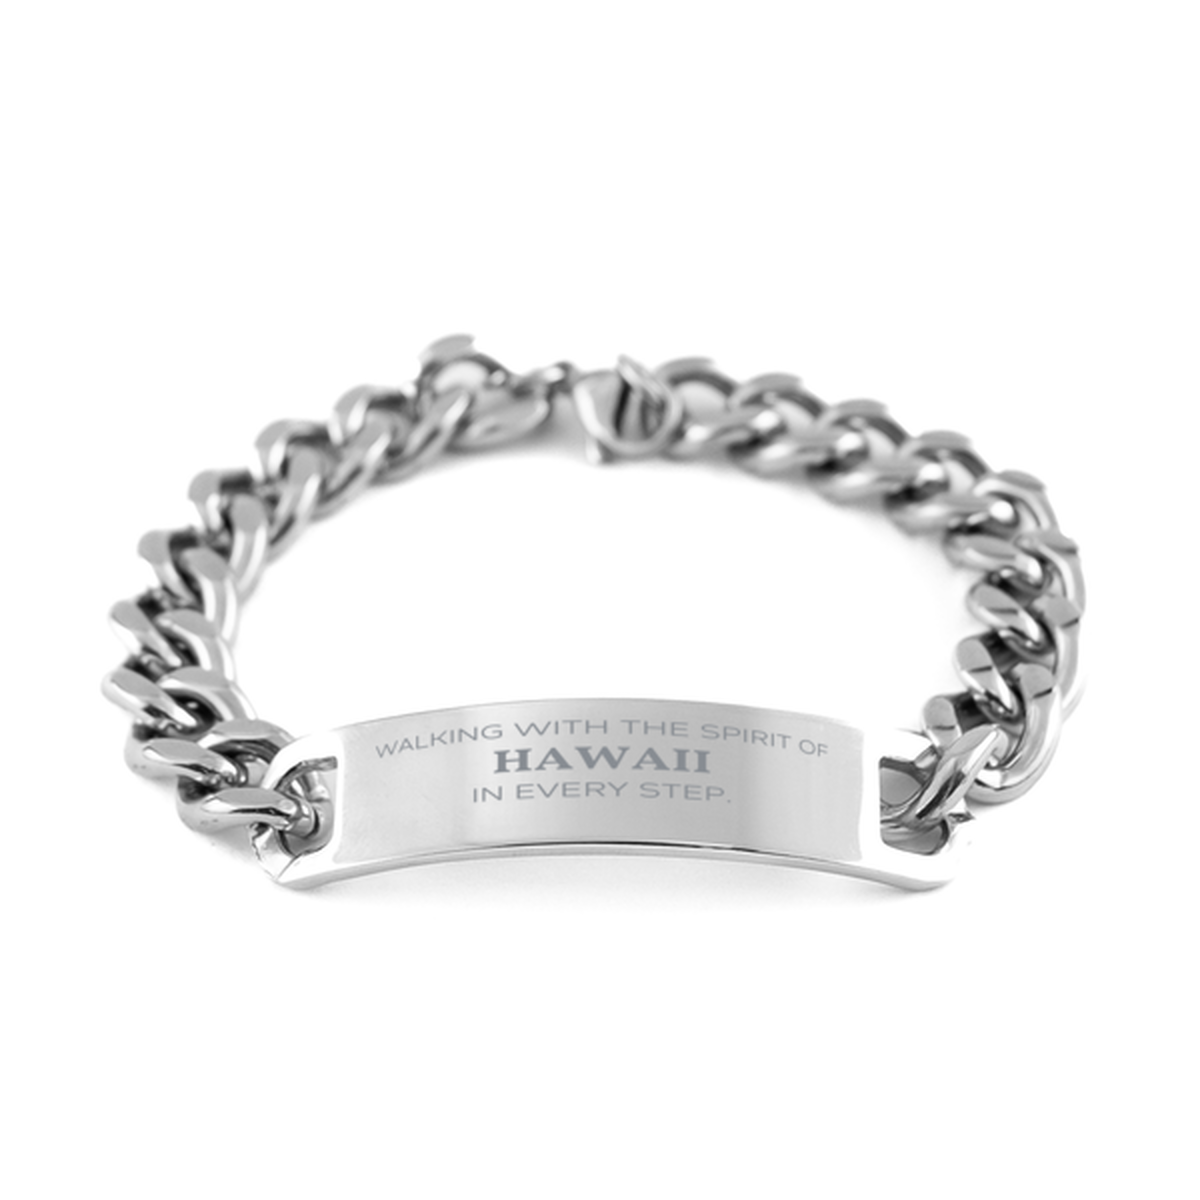 Hawaii Gifts, Walking with the spirit, Love Hawaii Birthday Christmas Cuban Chain Stainless Steel Bracelet For Hawaii People, Men, Women, Friends